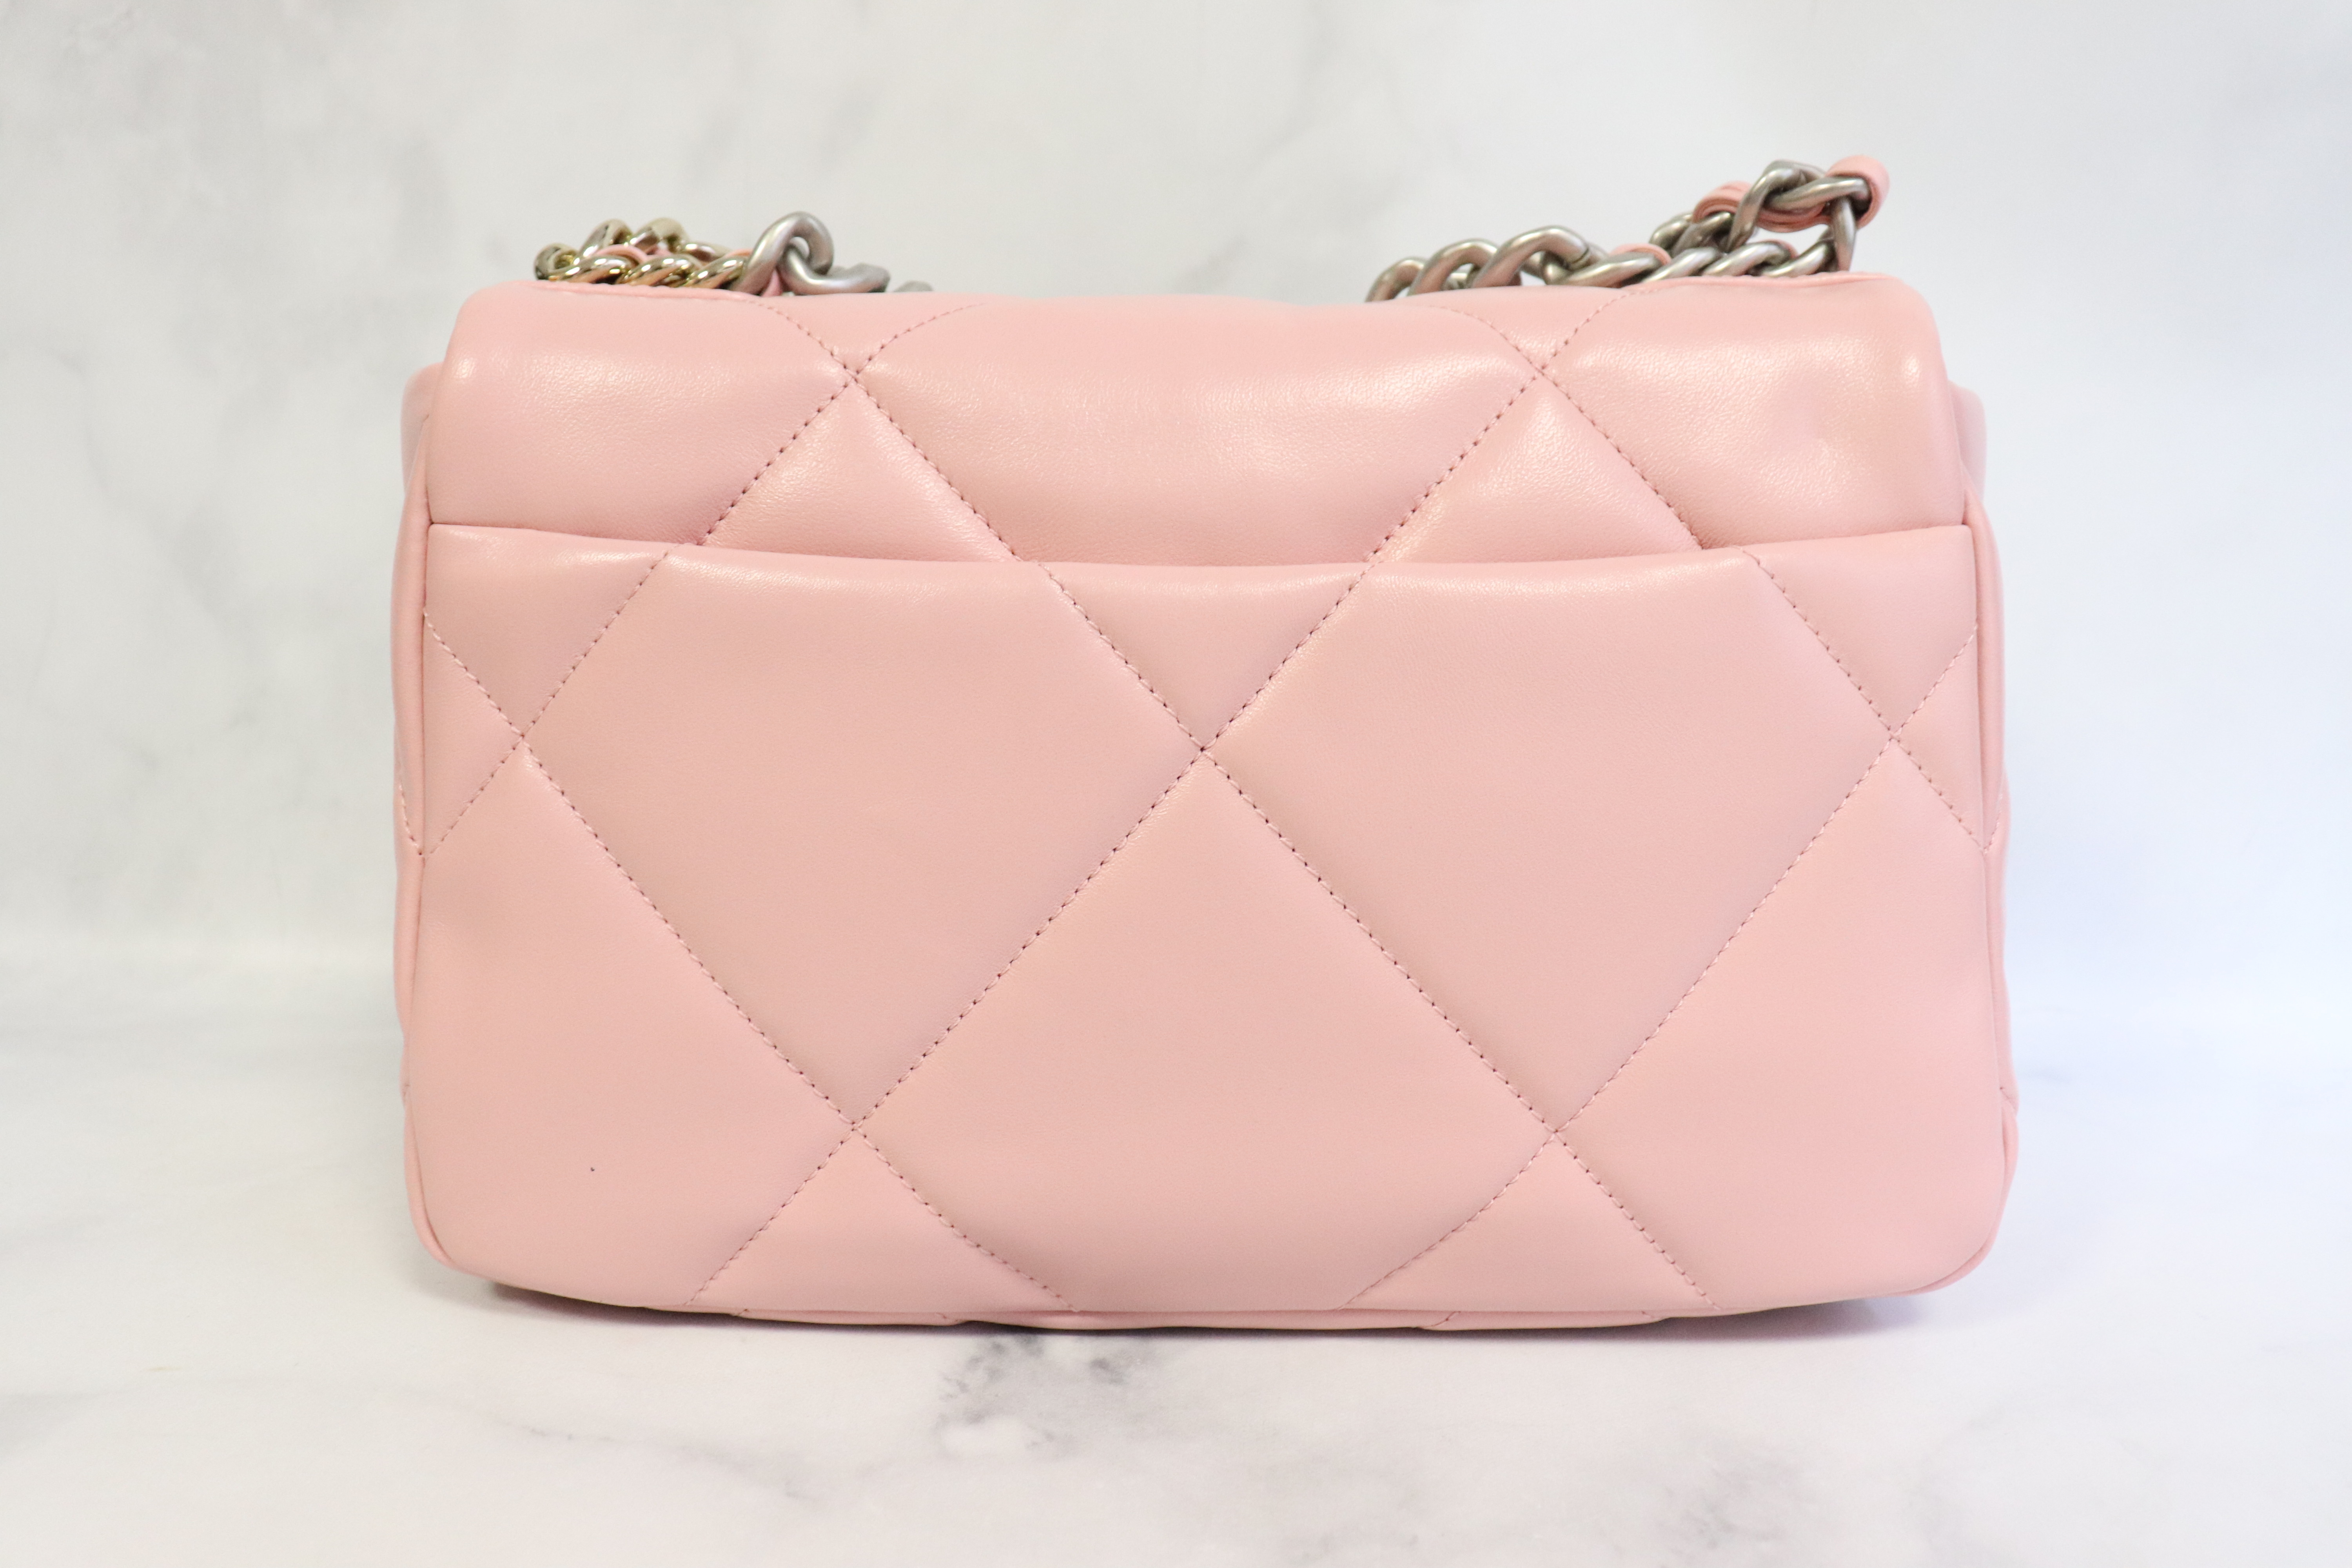 Chanel 19 Small, 21S Pink Leather, New in Box MA001 - Julia Rose Boston